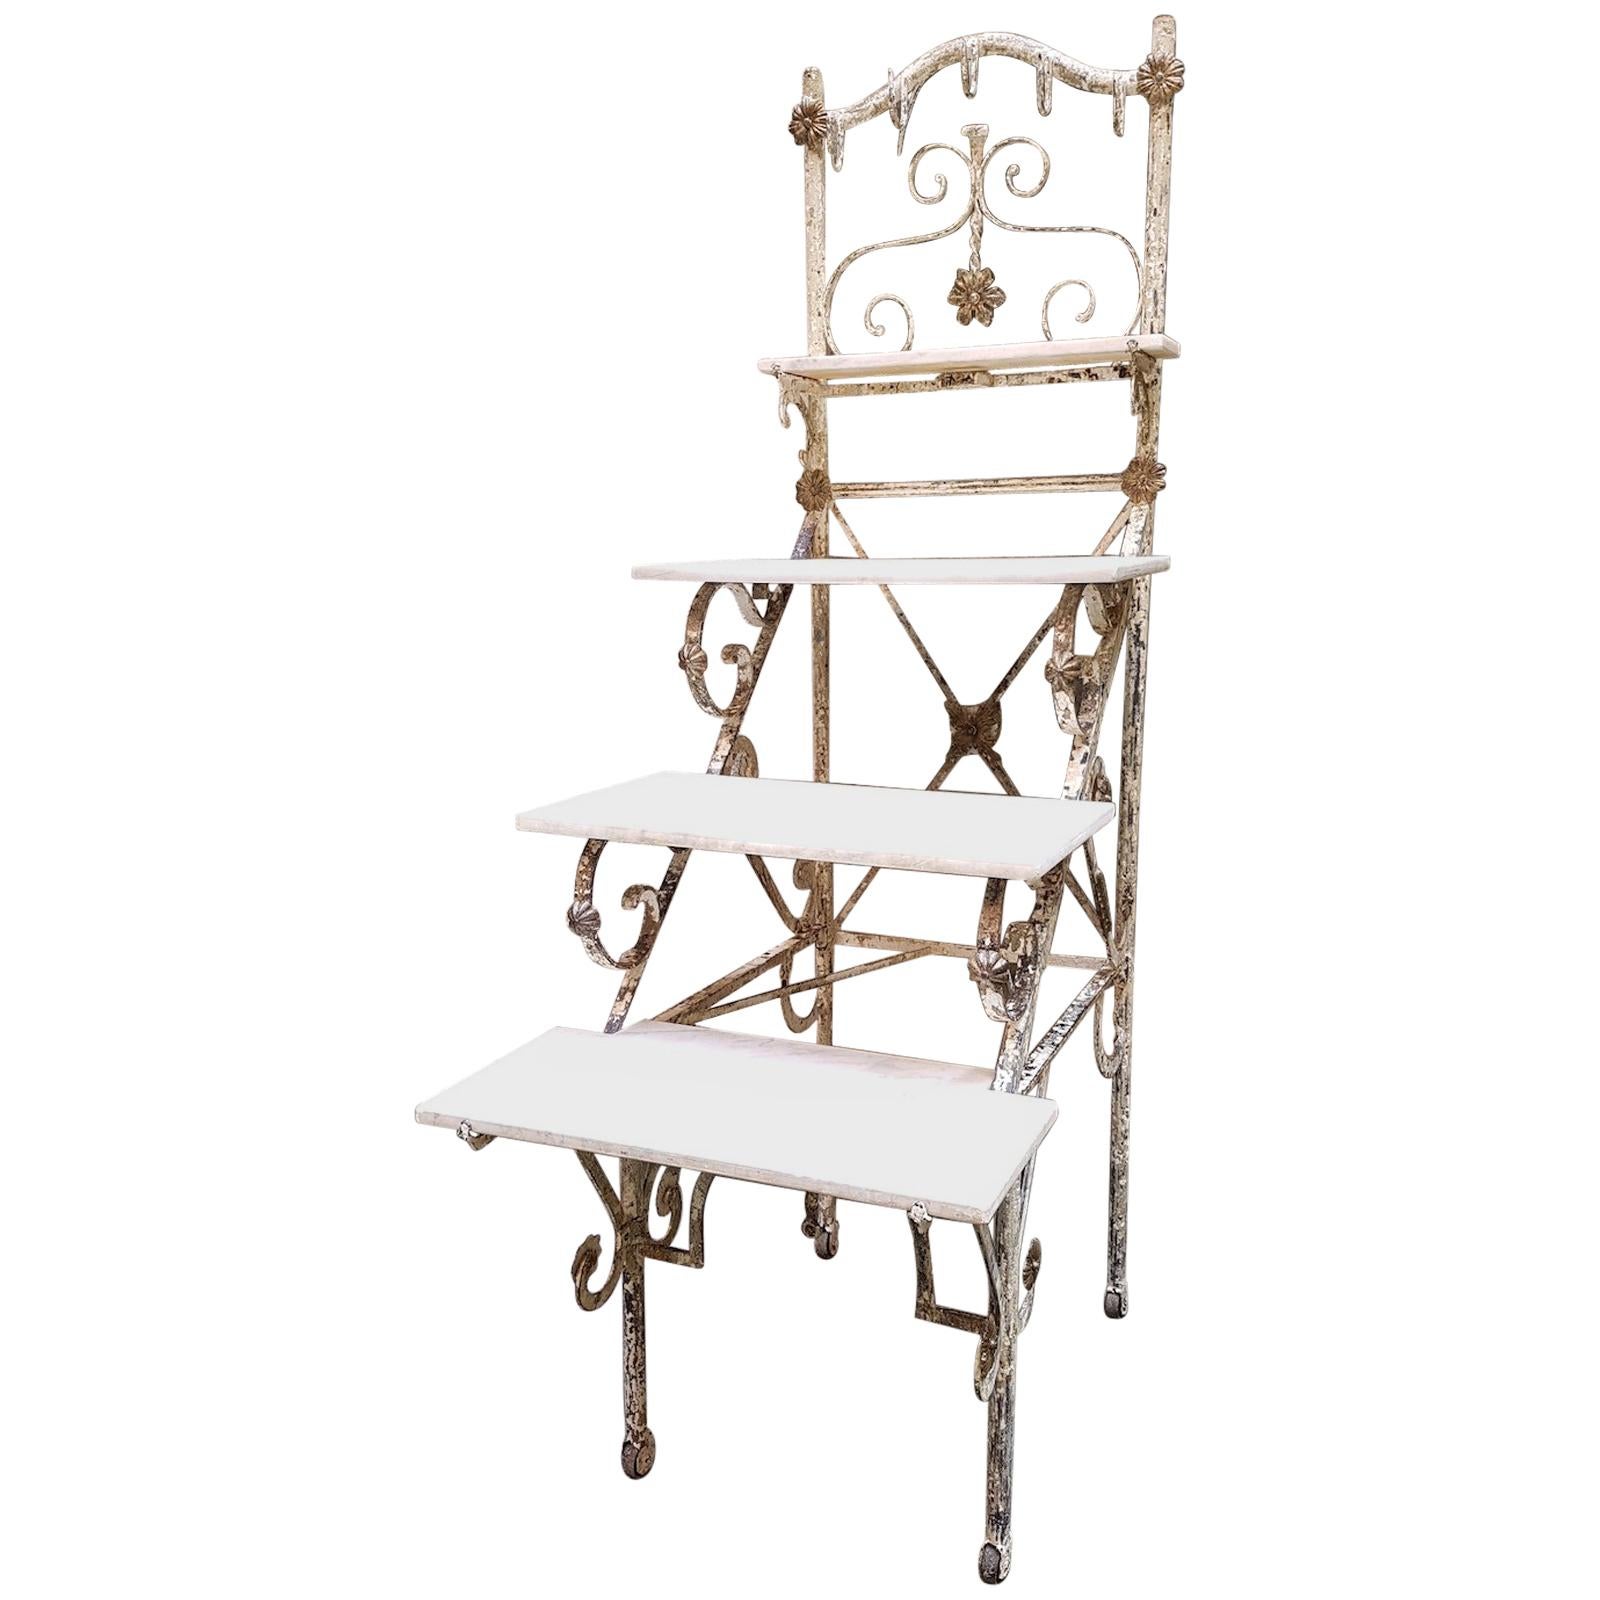 19th Century French Murble and Wrought Iron Butcher Etagère Display, 1880-1890 For Sale